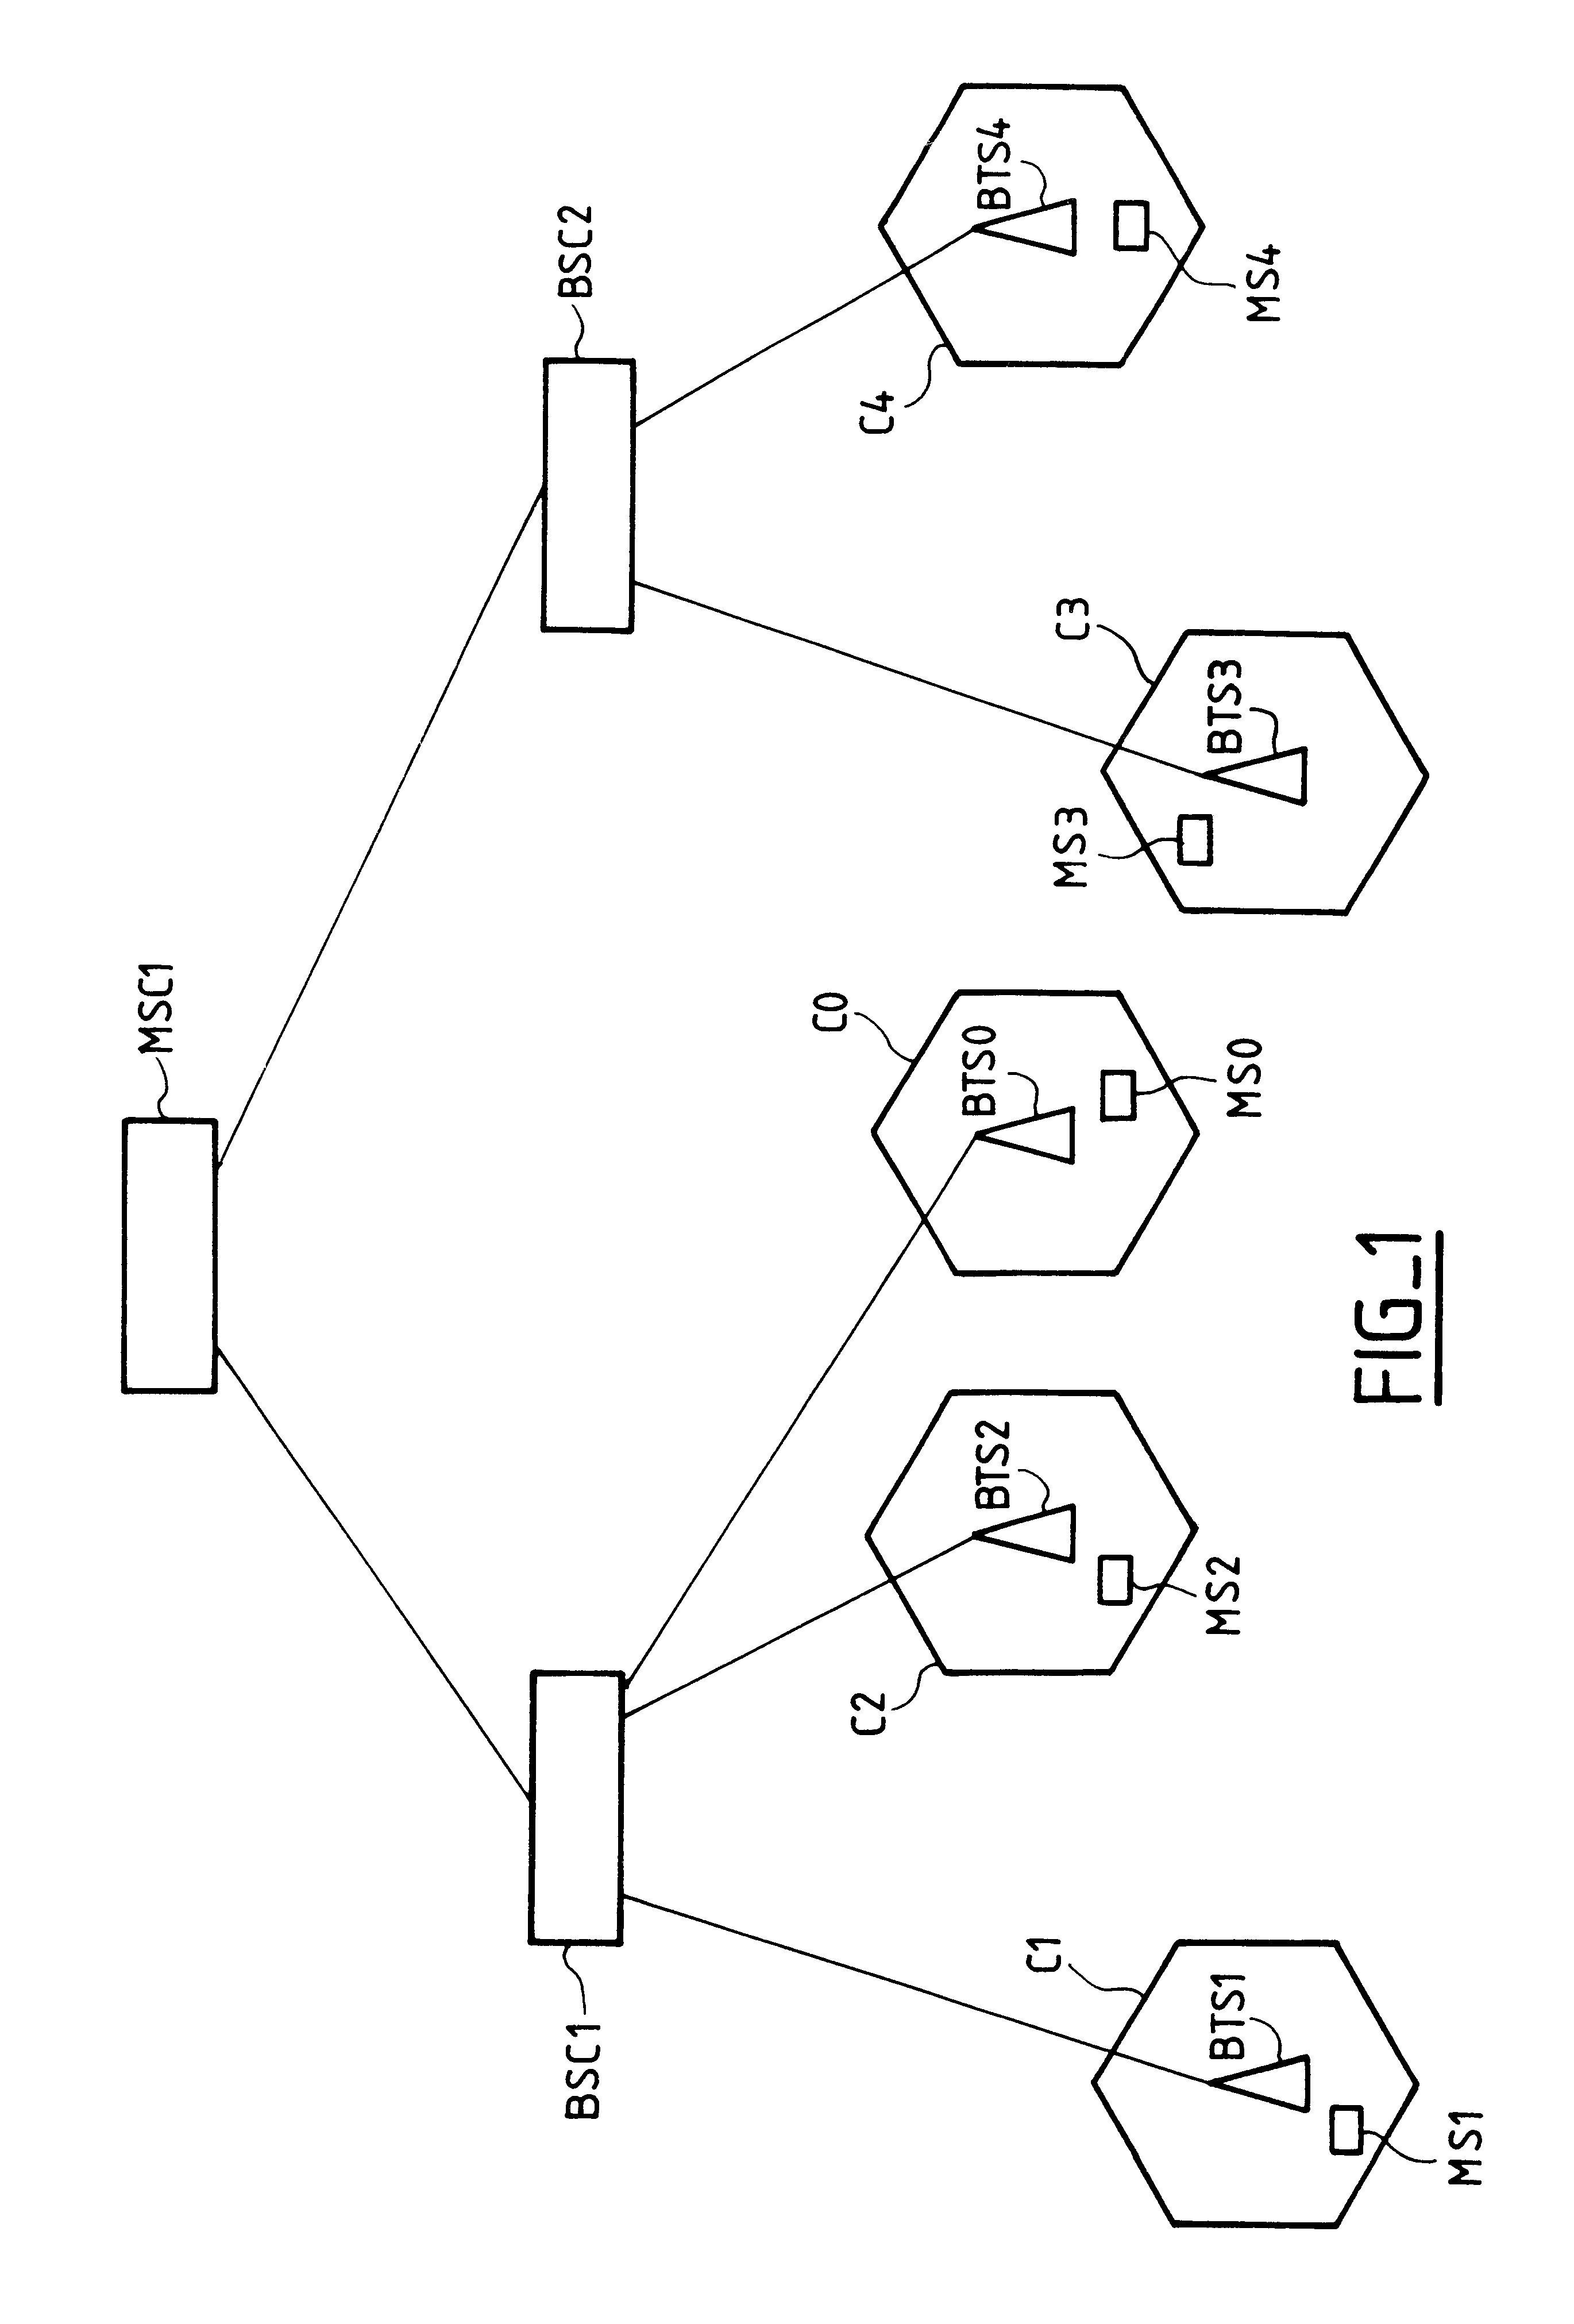 Method of selecting cells in a cellular mobile radio system